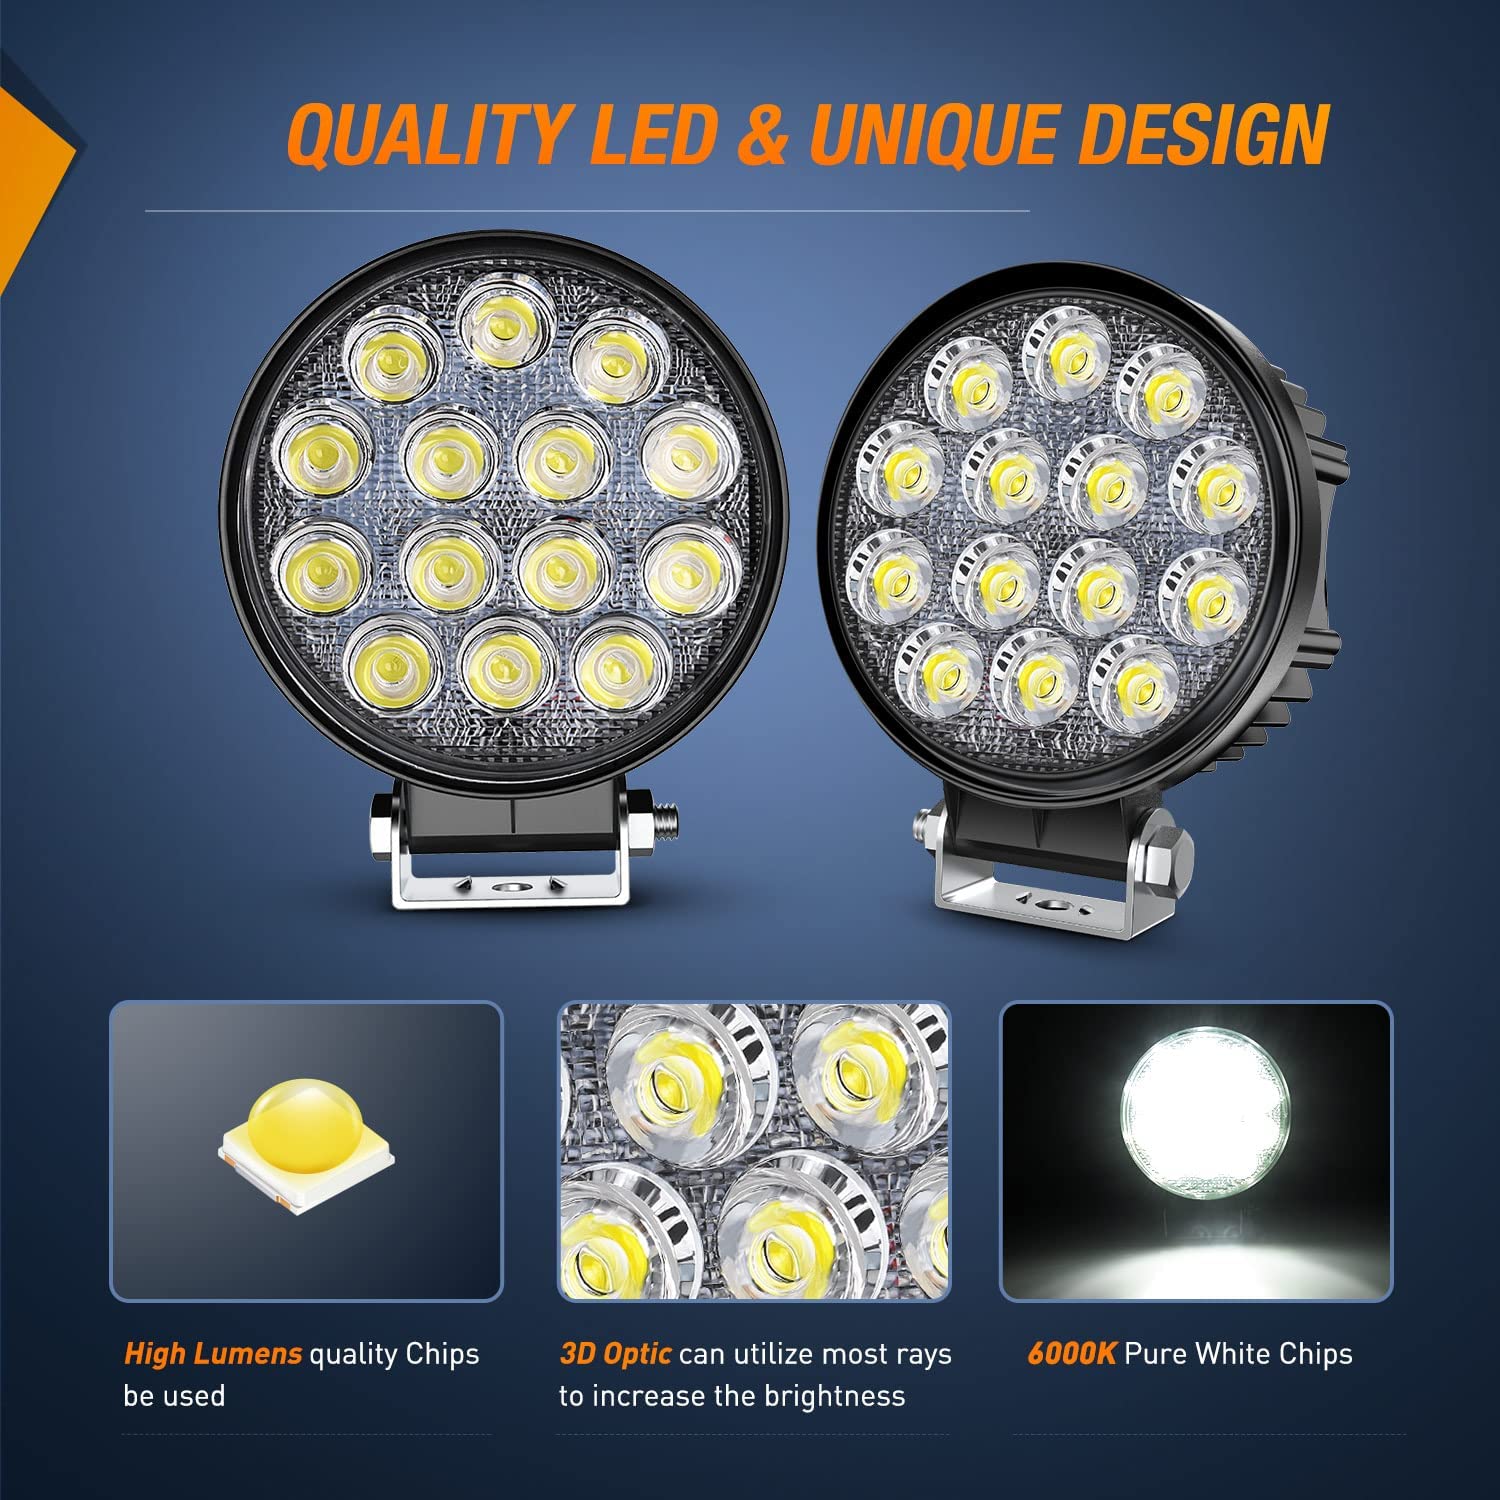 4.5" 42W 4200LM Round Flood LED Work Lights (2 Pairs) | 16AWG Wire 3Pin Switch Nilight